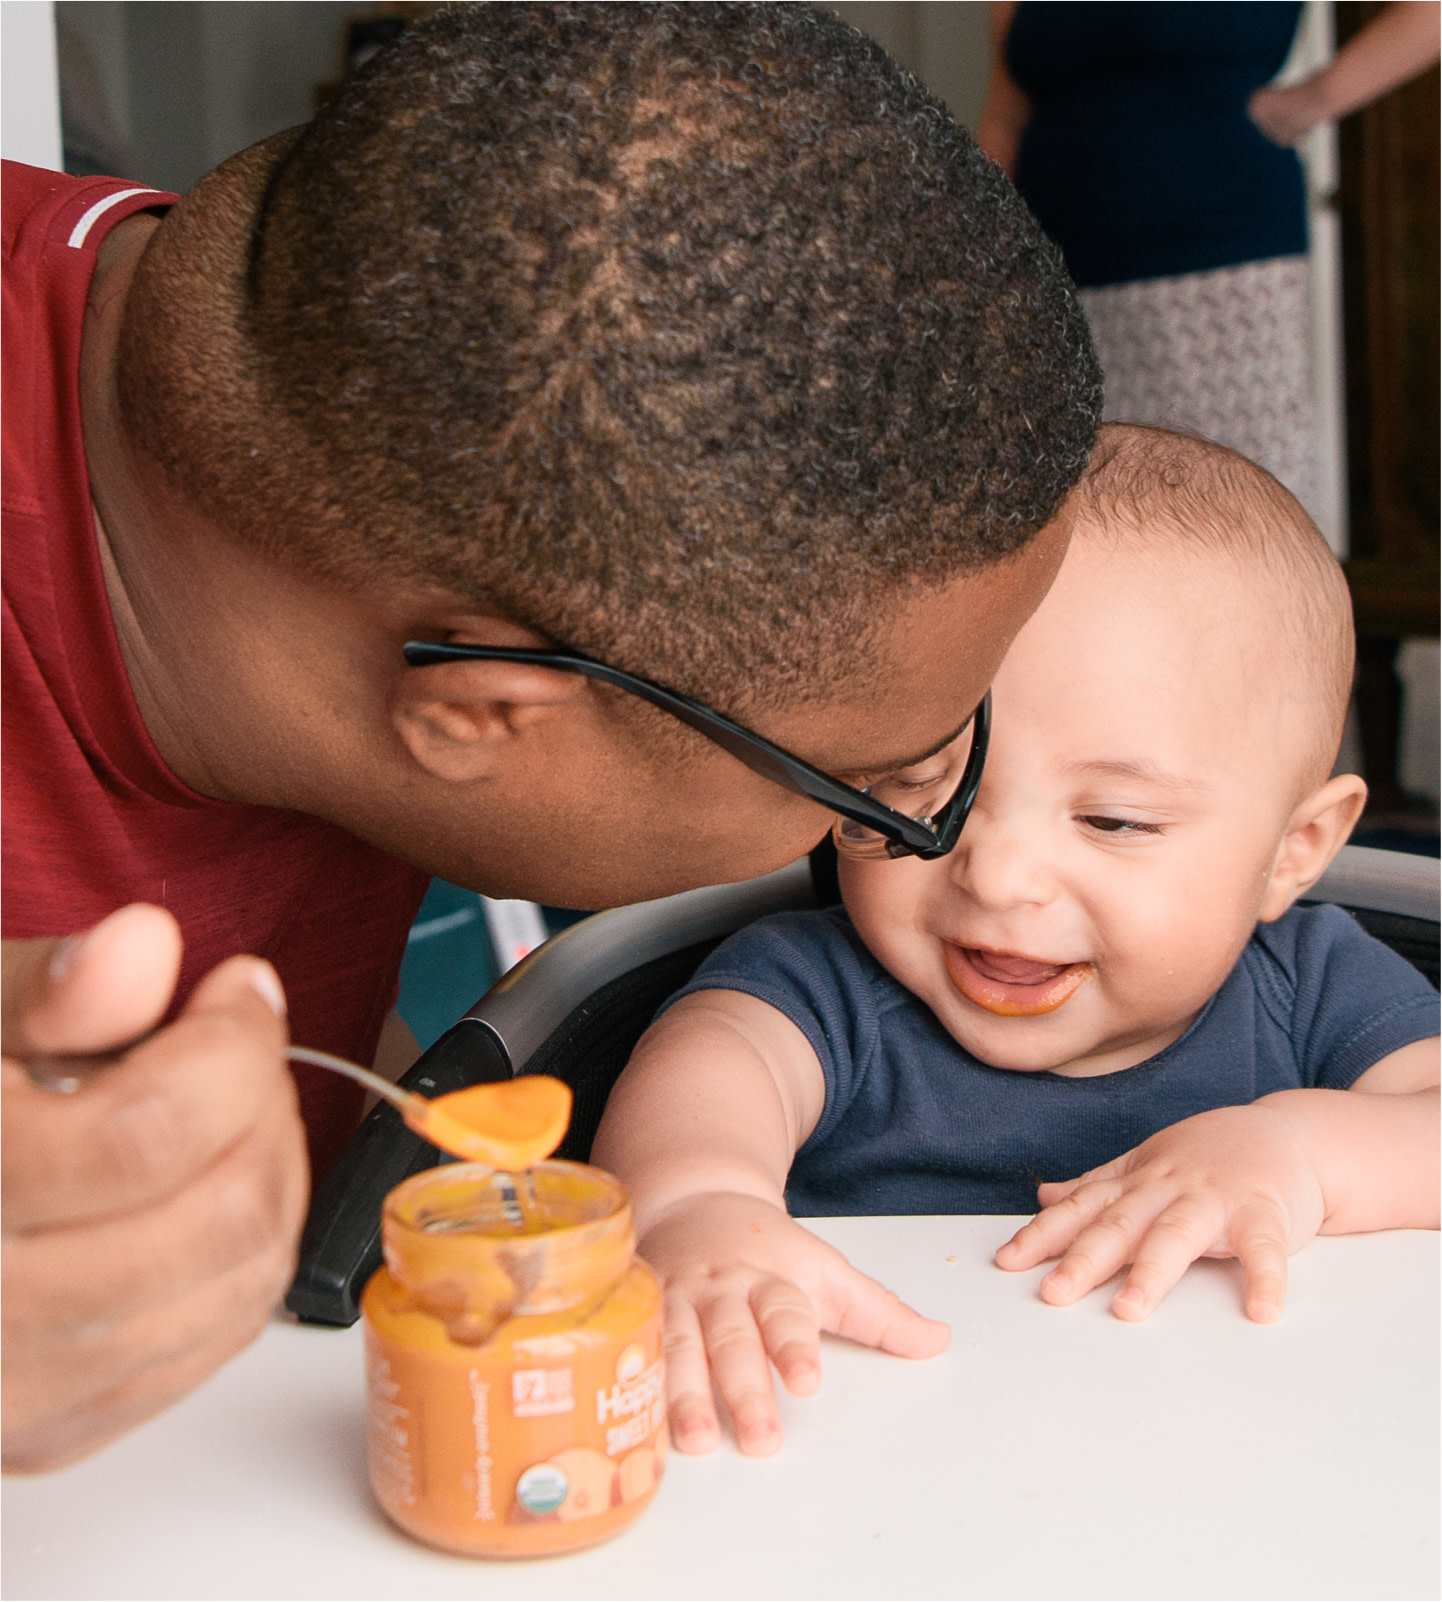 Father spoonfeeding son at table